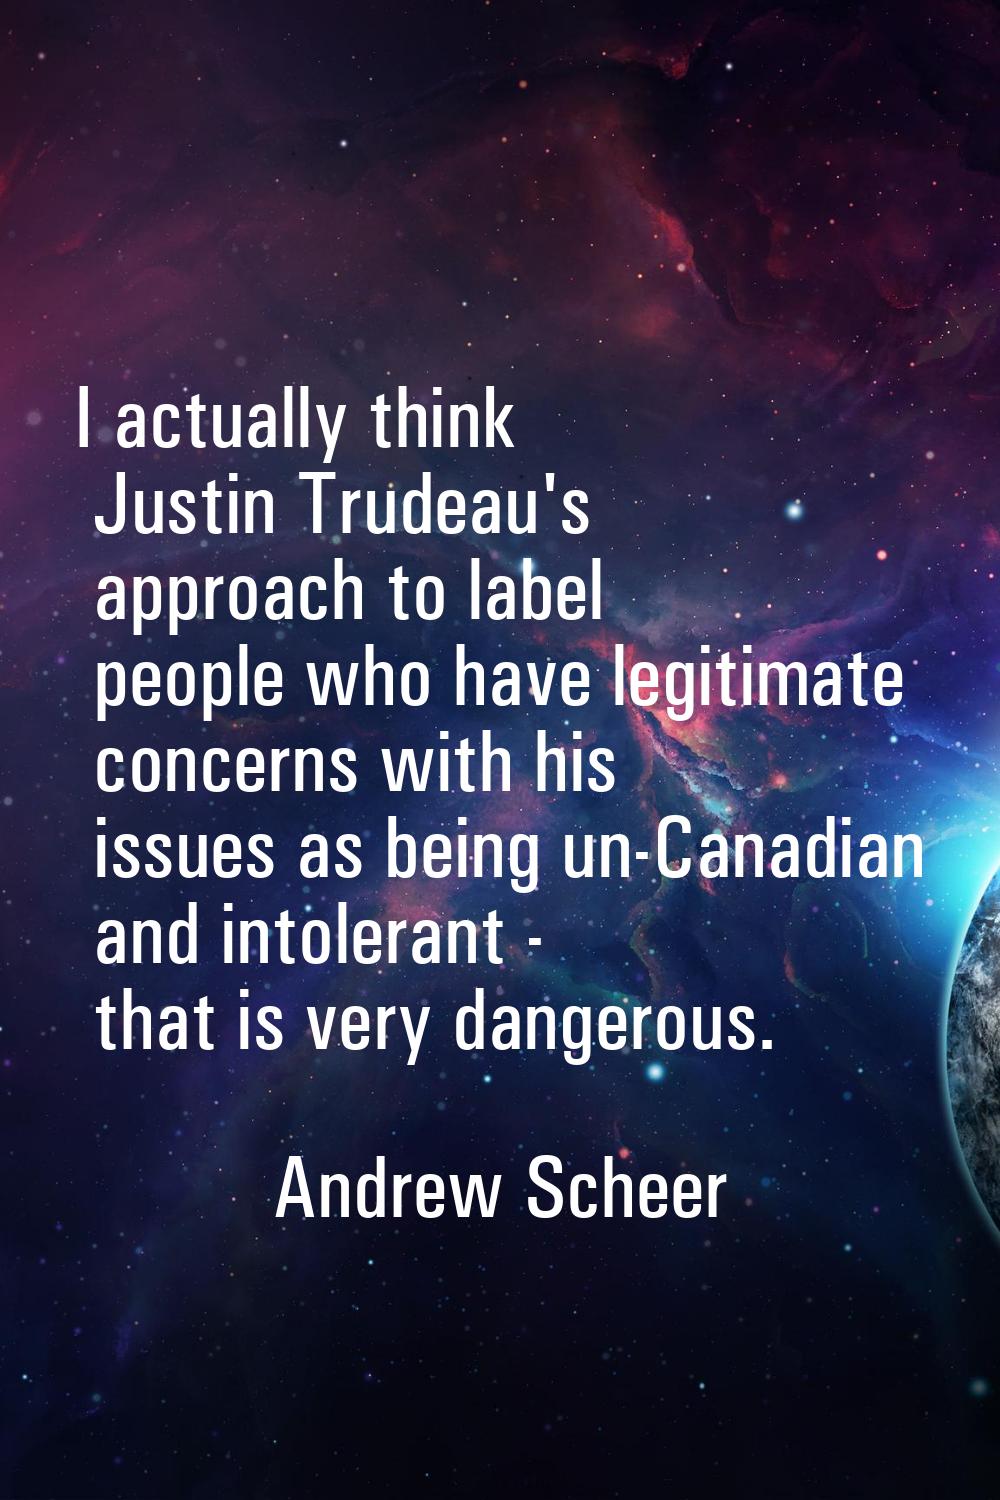 I actually think Justin Trudeau's approach to label people who have legitimate concerns with his is